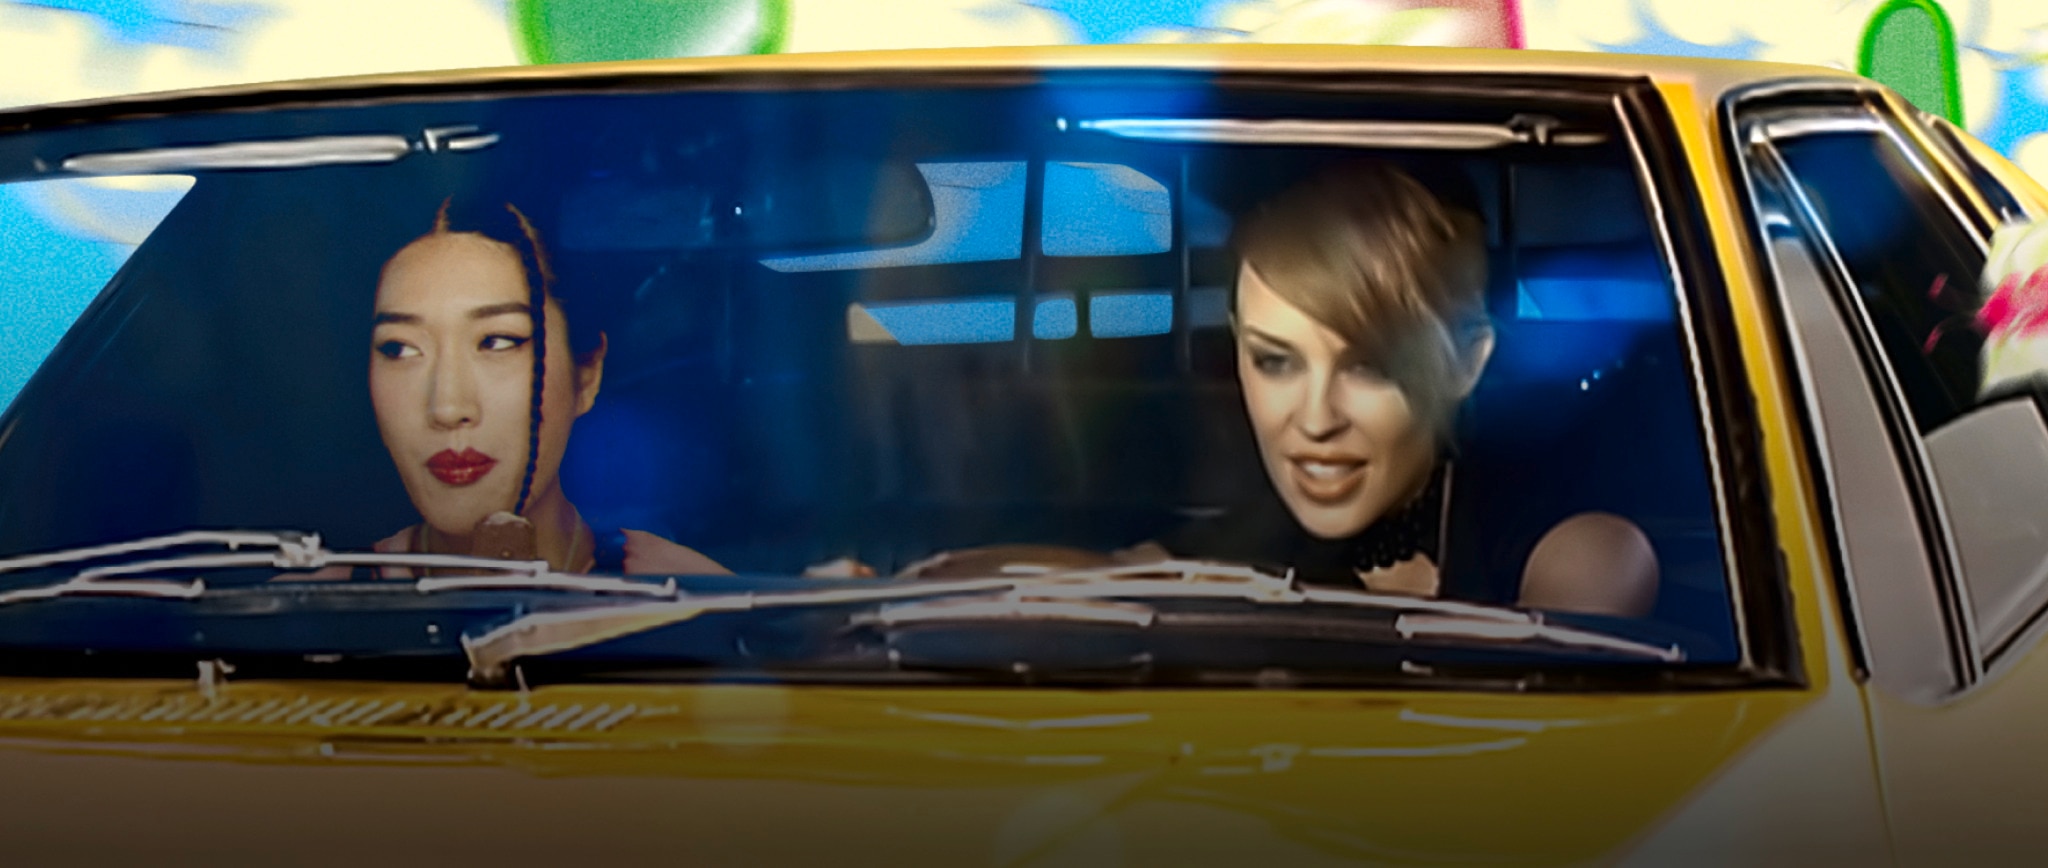 Peggy Gou & Kylie Minogue inside iconic yellow car